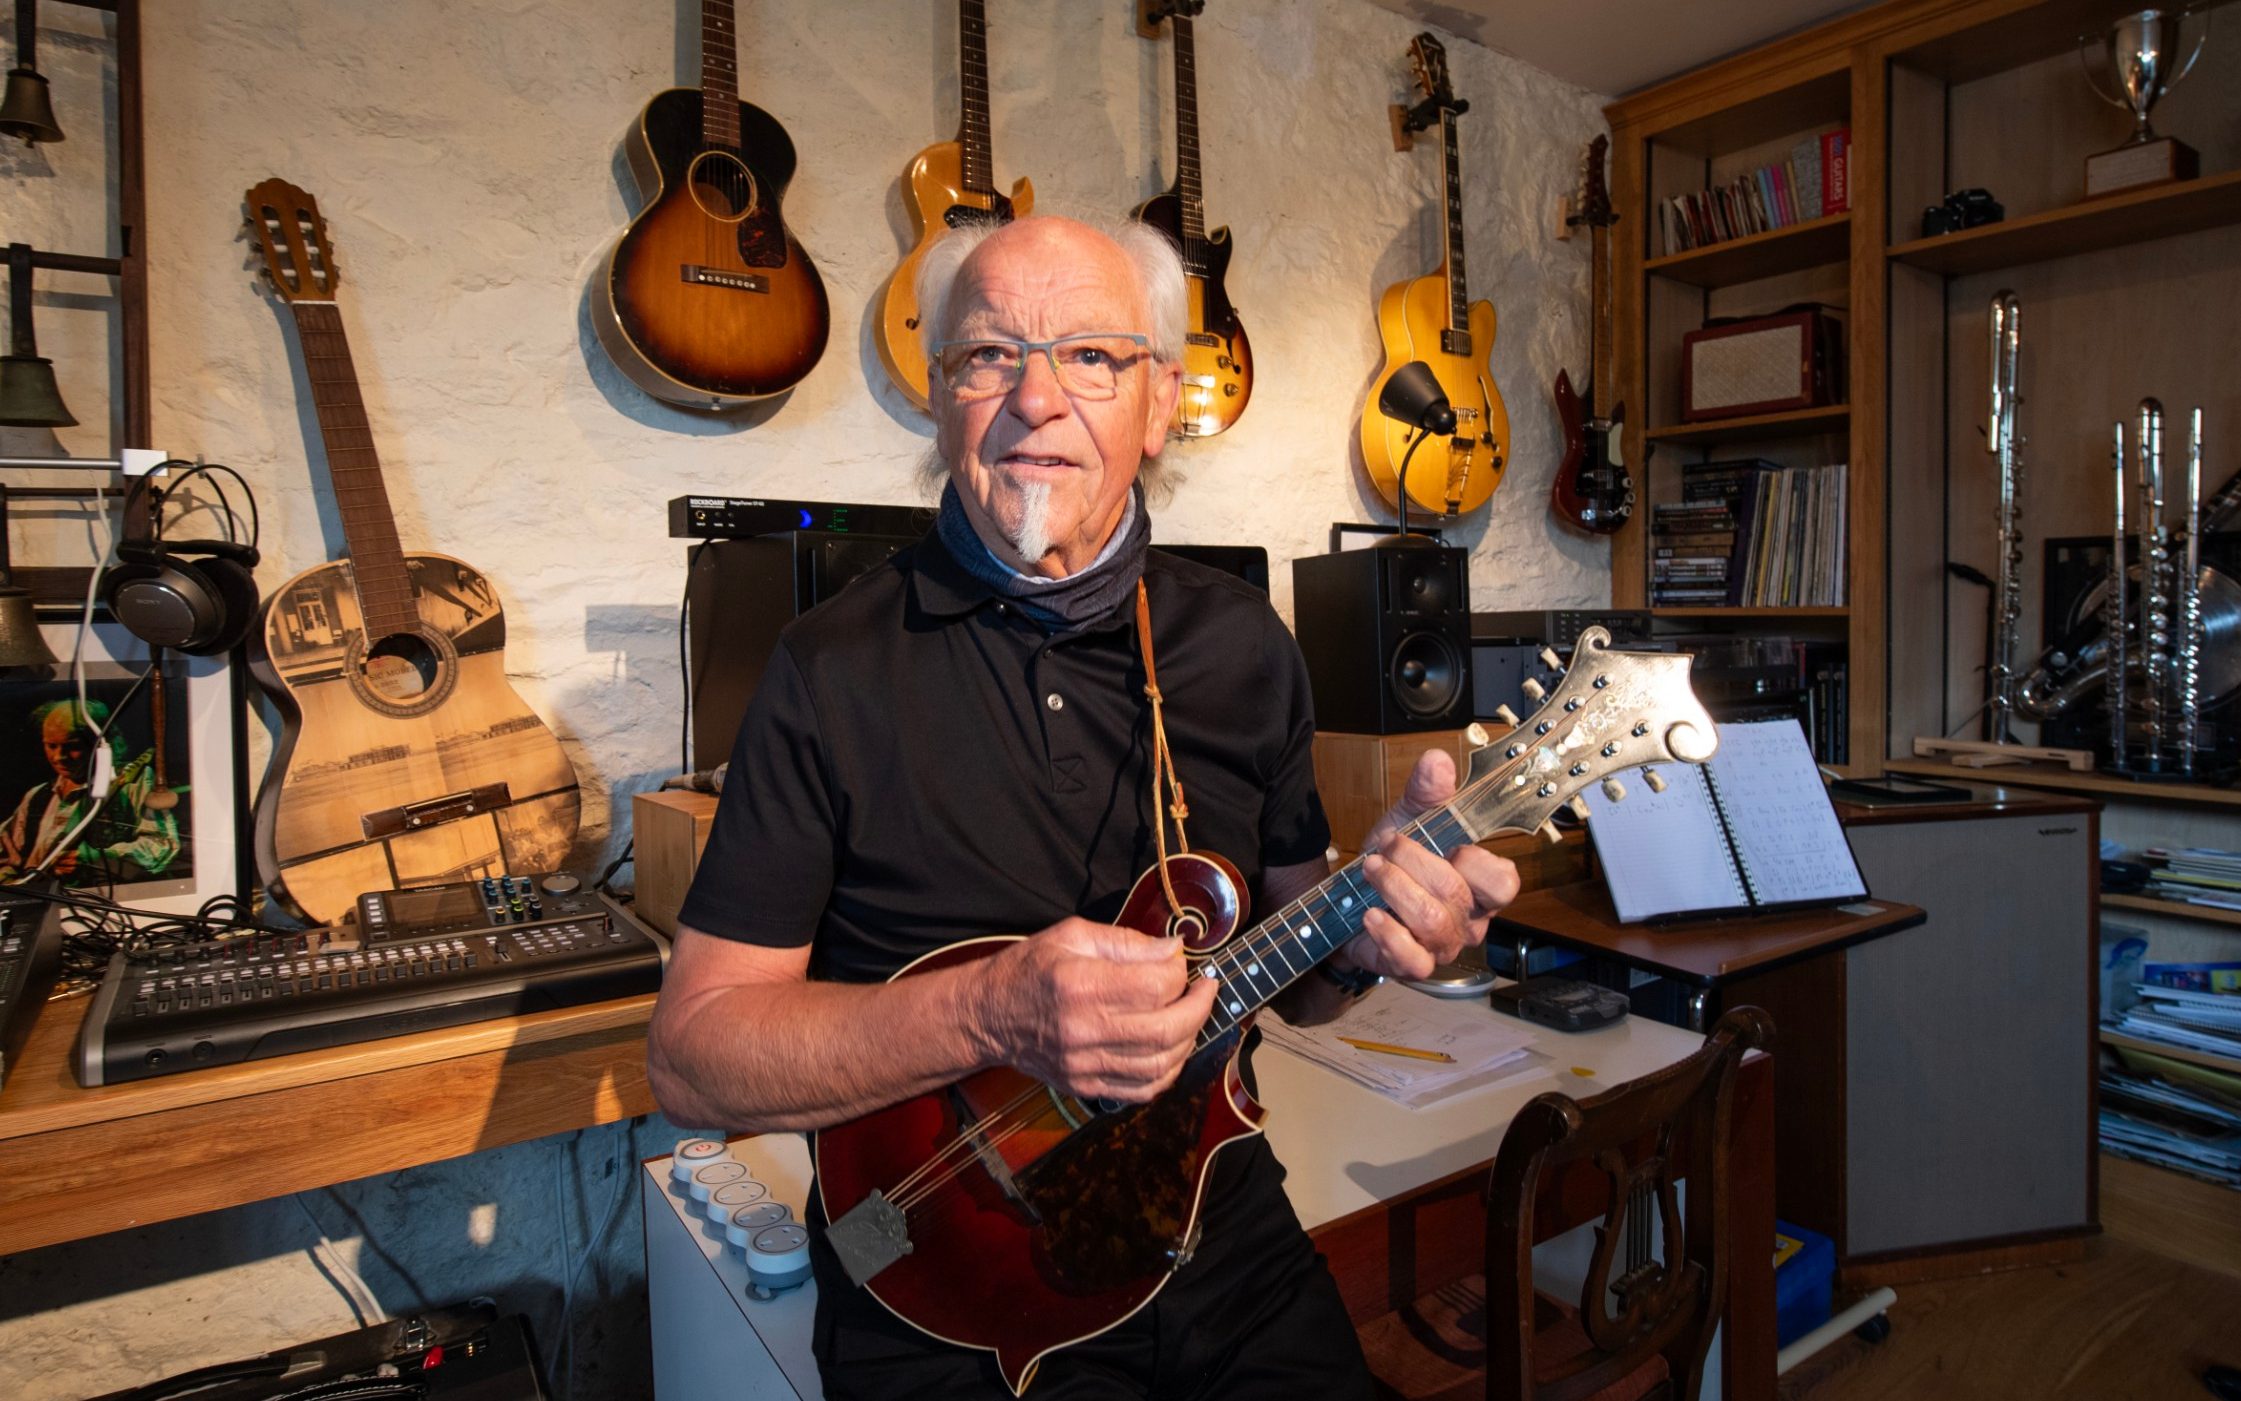 jethro tull guitarist: ‘we bought a house for £125k, then sold it for £2m’